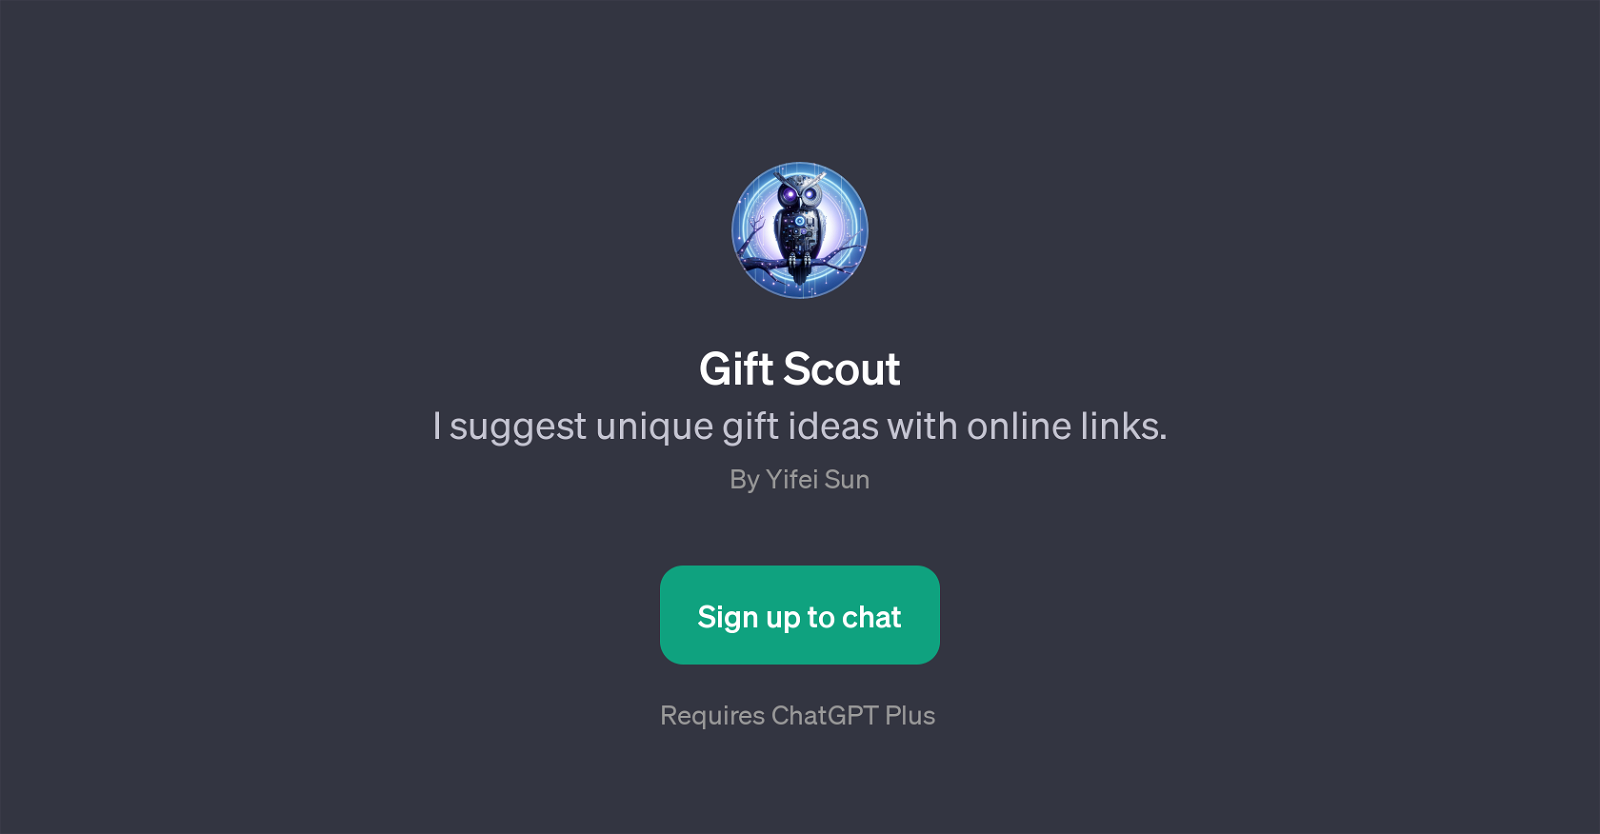 Gift Scout website